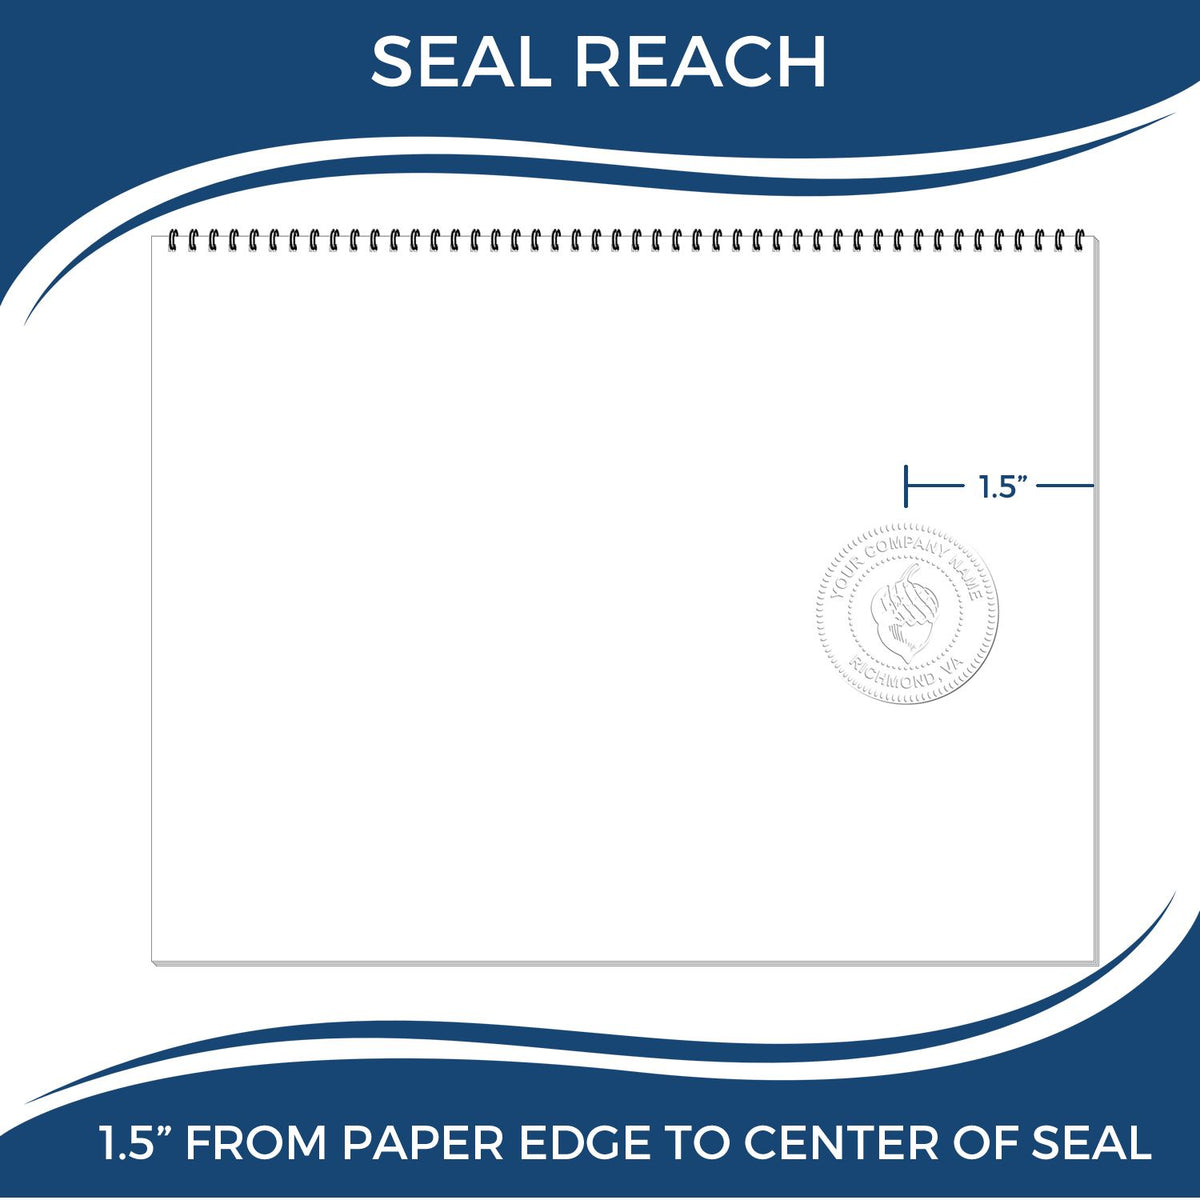 An infographic showing the seal reach which is represented by a ruler and a miniature seal image of the Gift Massachusetts Engineer Seal